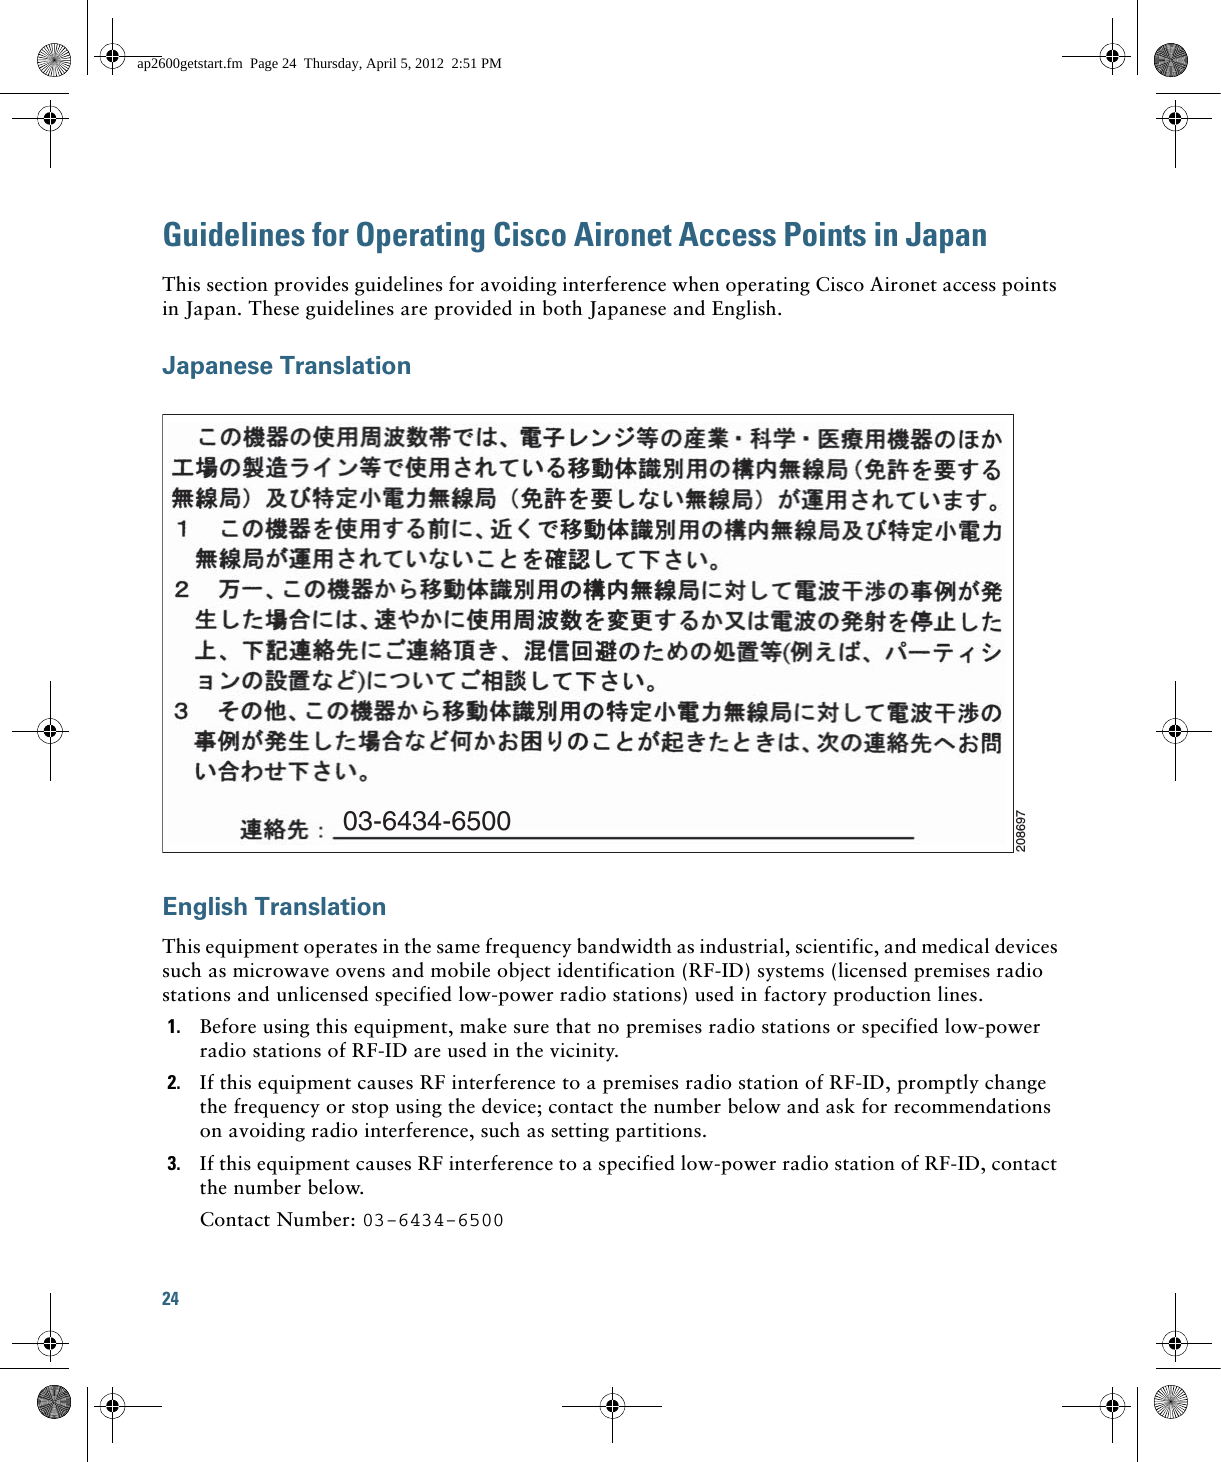 24 Guidelines for Operating Cisco Aironet Access Points in JapanThis section provides guidelines for avoiding interference when operating Cisco Aironet access points in Japan. These guidelines are provided in both Japanese and English.Japanese TranslationEnglish TranslationThis equipment operates in the same frequency bandwidth as industrial, scientific, and medical devices such as microwave ovens and mobile object identification (RF-ID) systems (licensed premises radio stations and unlicensed specified low-power radio stations) used in factory production lines.1. Before using this equipment, make sure that no premises radio stations or specified low-power radio stations of RF-ID are used in the vicinity.2. If this equipment causes RF interference to a premises radio station of RF-ID, promptly change the frequency or stop using the device; contact the number below and ask for recommendations on avoiding radio interference, such as setting partitions.3. If this equipment causes RF interference to a specified low-power radio station of RF-ID, contact the number below.Contact Number: 03-6434-650003-6434-6500208697ap2600getstart.fm  Page 24  Thursday, April 5, 2012  2:51 PM